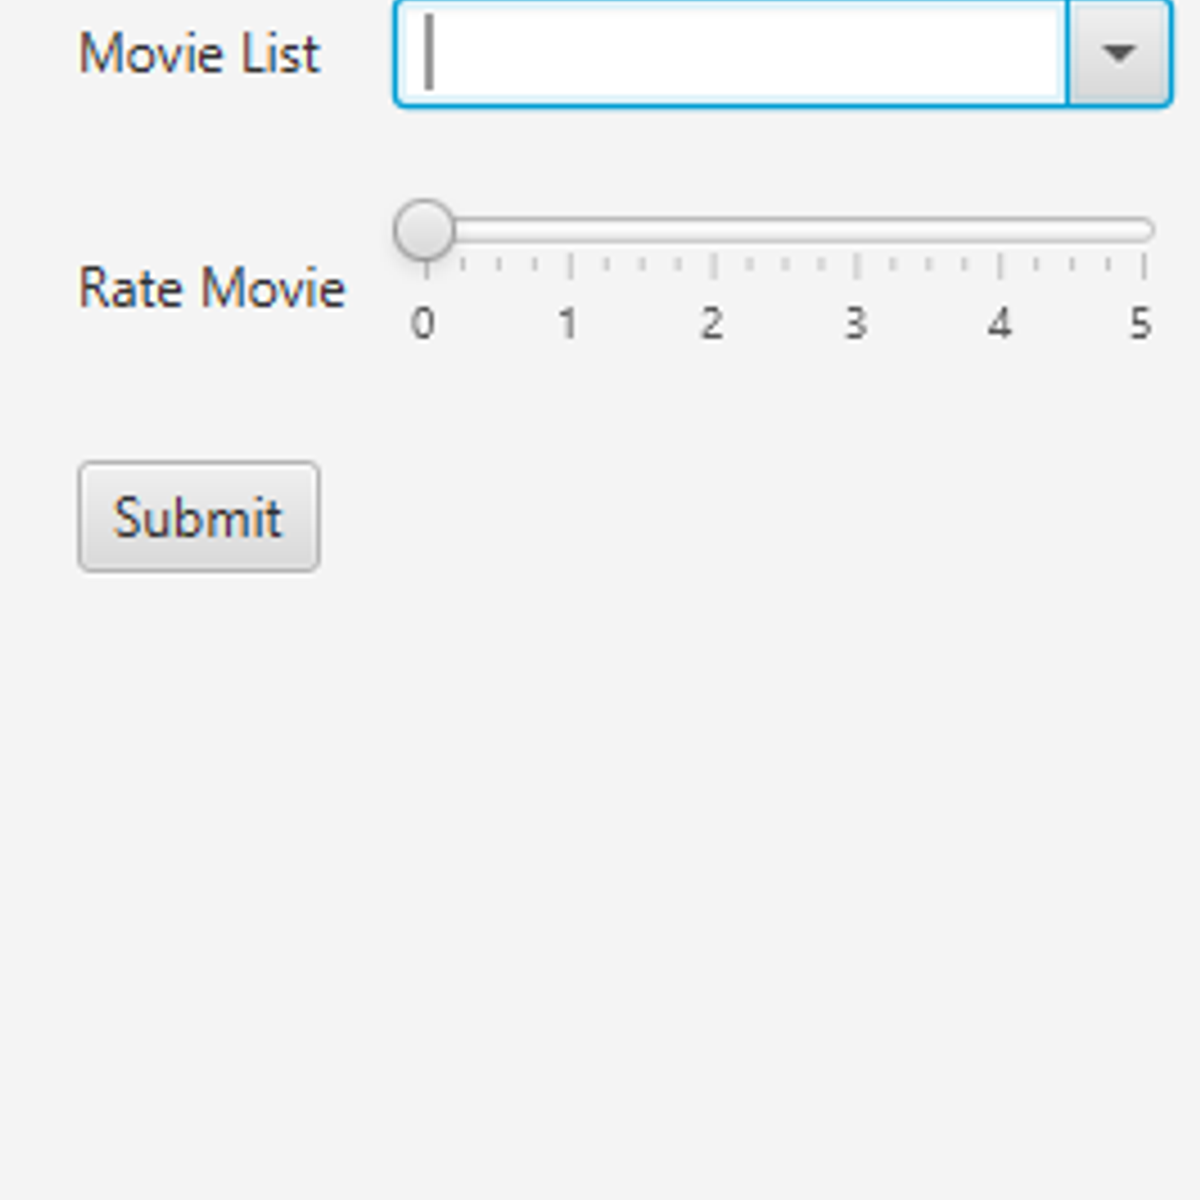 Create a JavaFX movie rater GUI with combo box and a slider